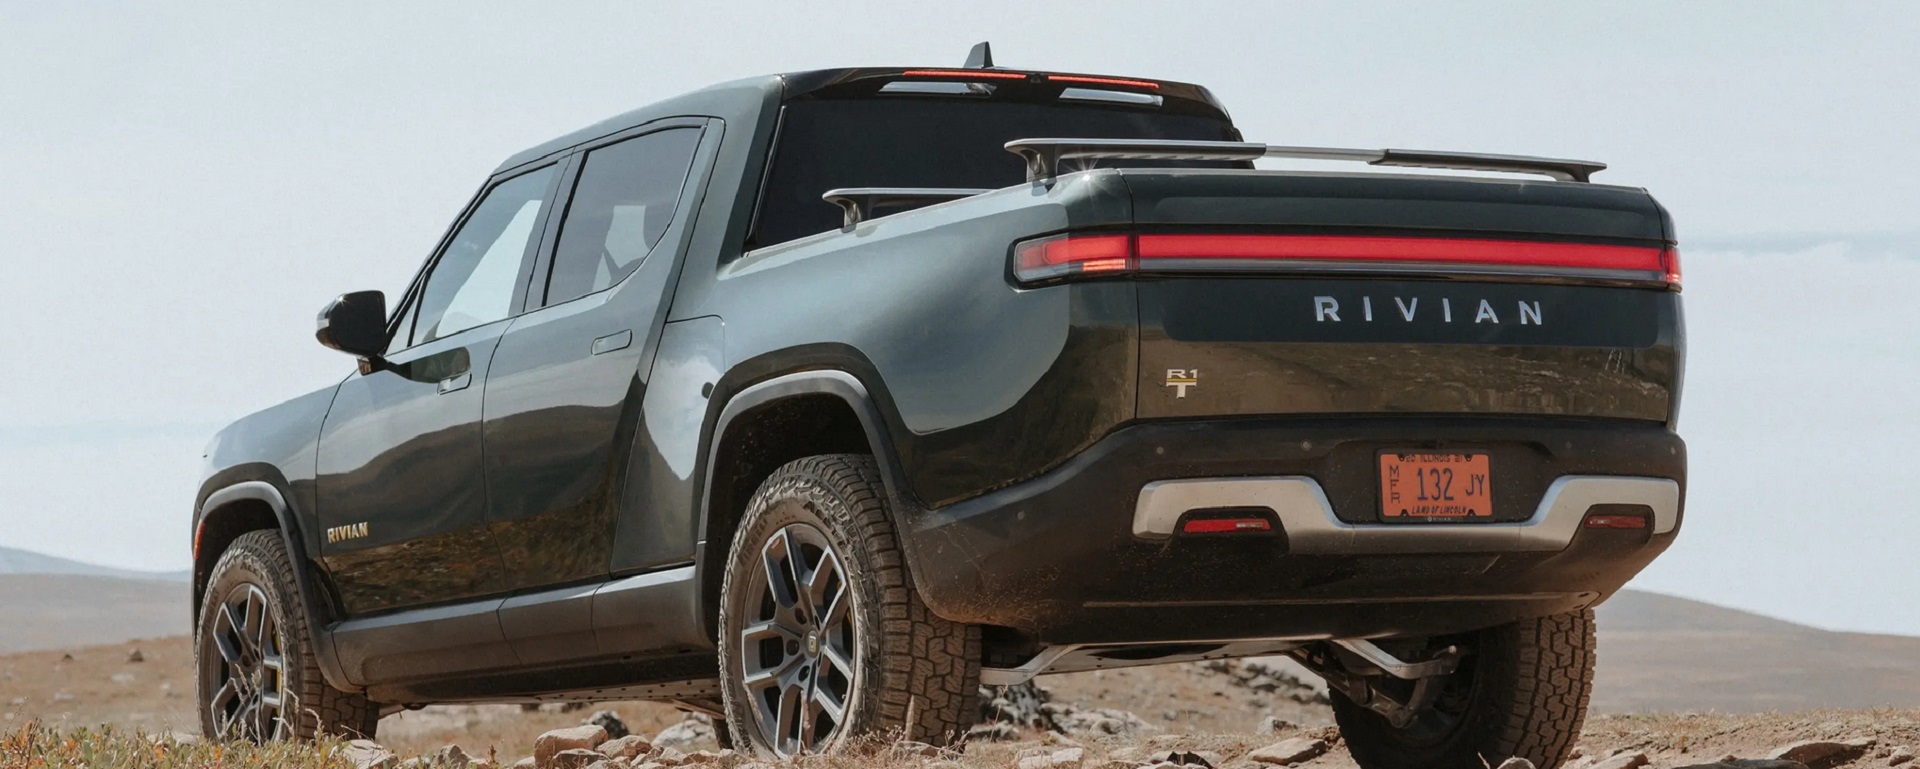 Photo of the Rivian R1T